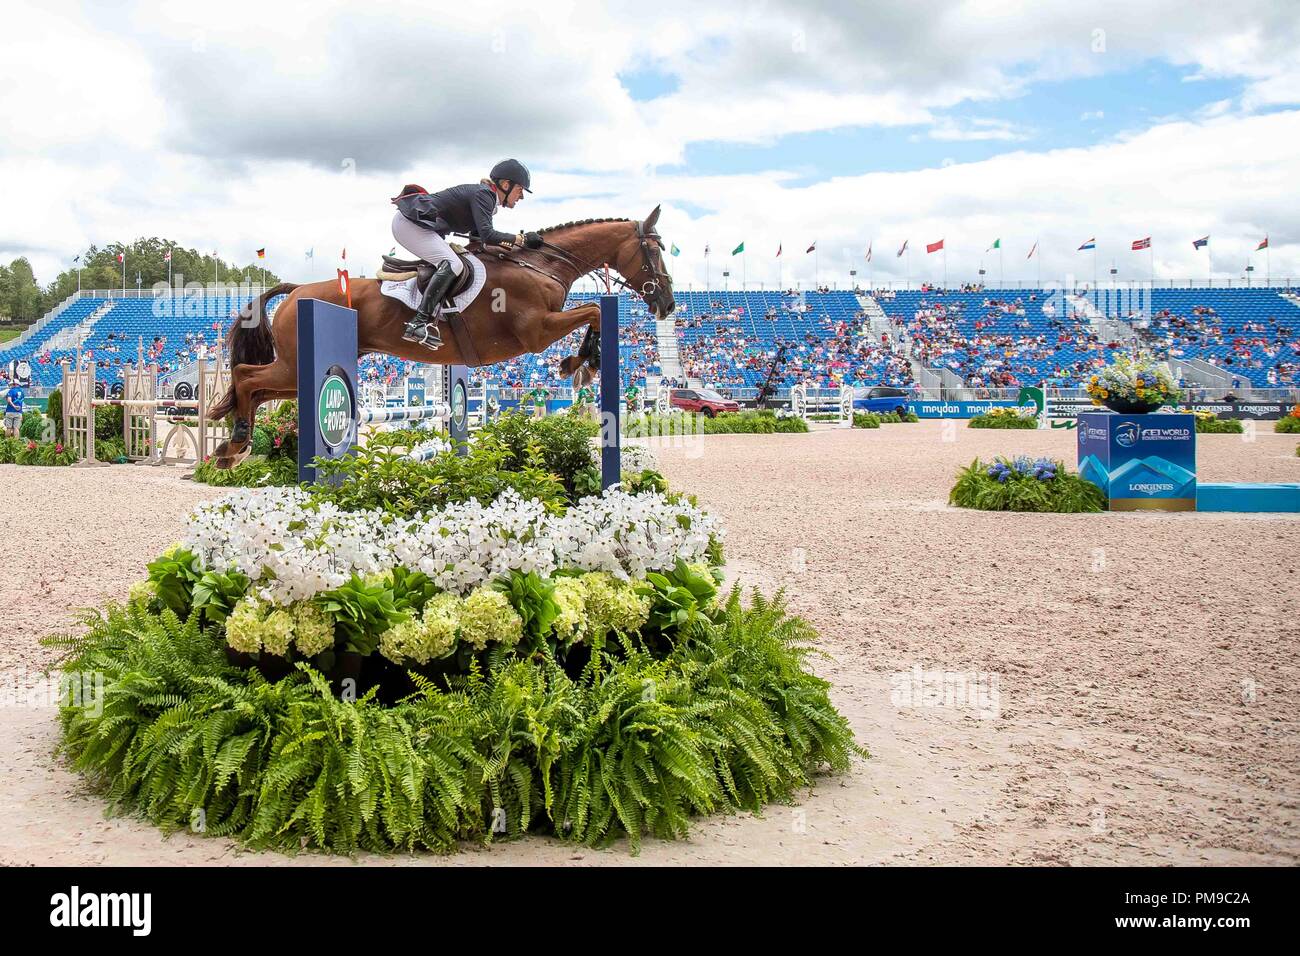 Kristina Cook. Billy the Red. GBR. Eventing Show Jumping Day 6. World Equestrian Games. WEG 2018 Tryon. North Carolina. USA. 17/09/2018. Stock Photo